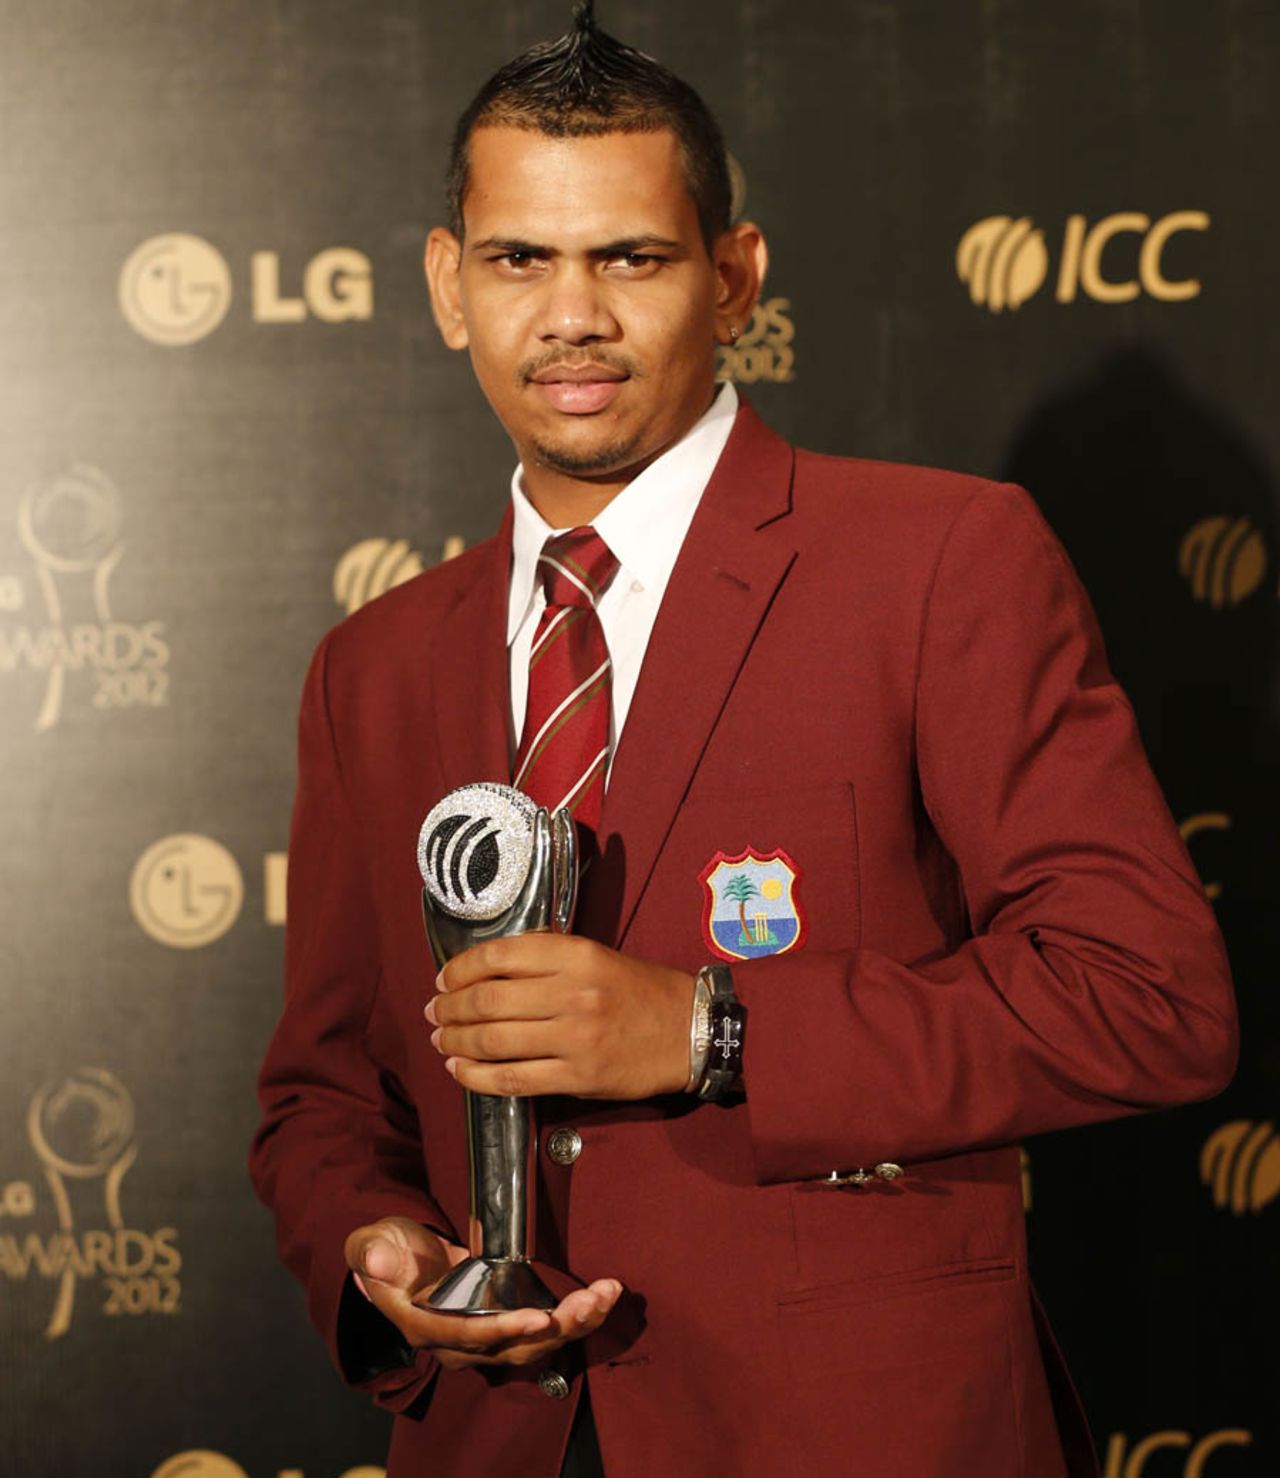 Sunil Narine with the Emerging Cricketer of the Year award, Colombo, September 15, 2012